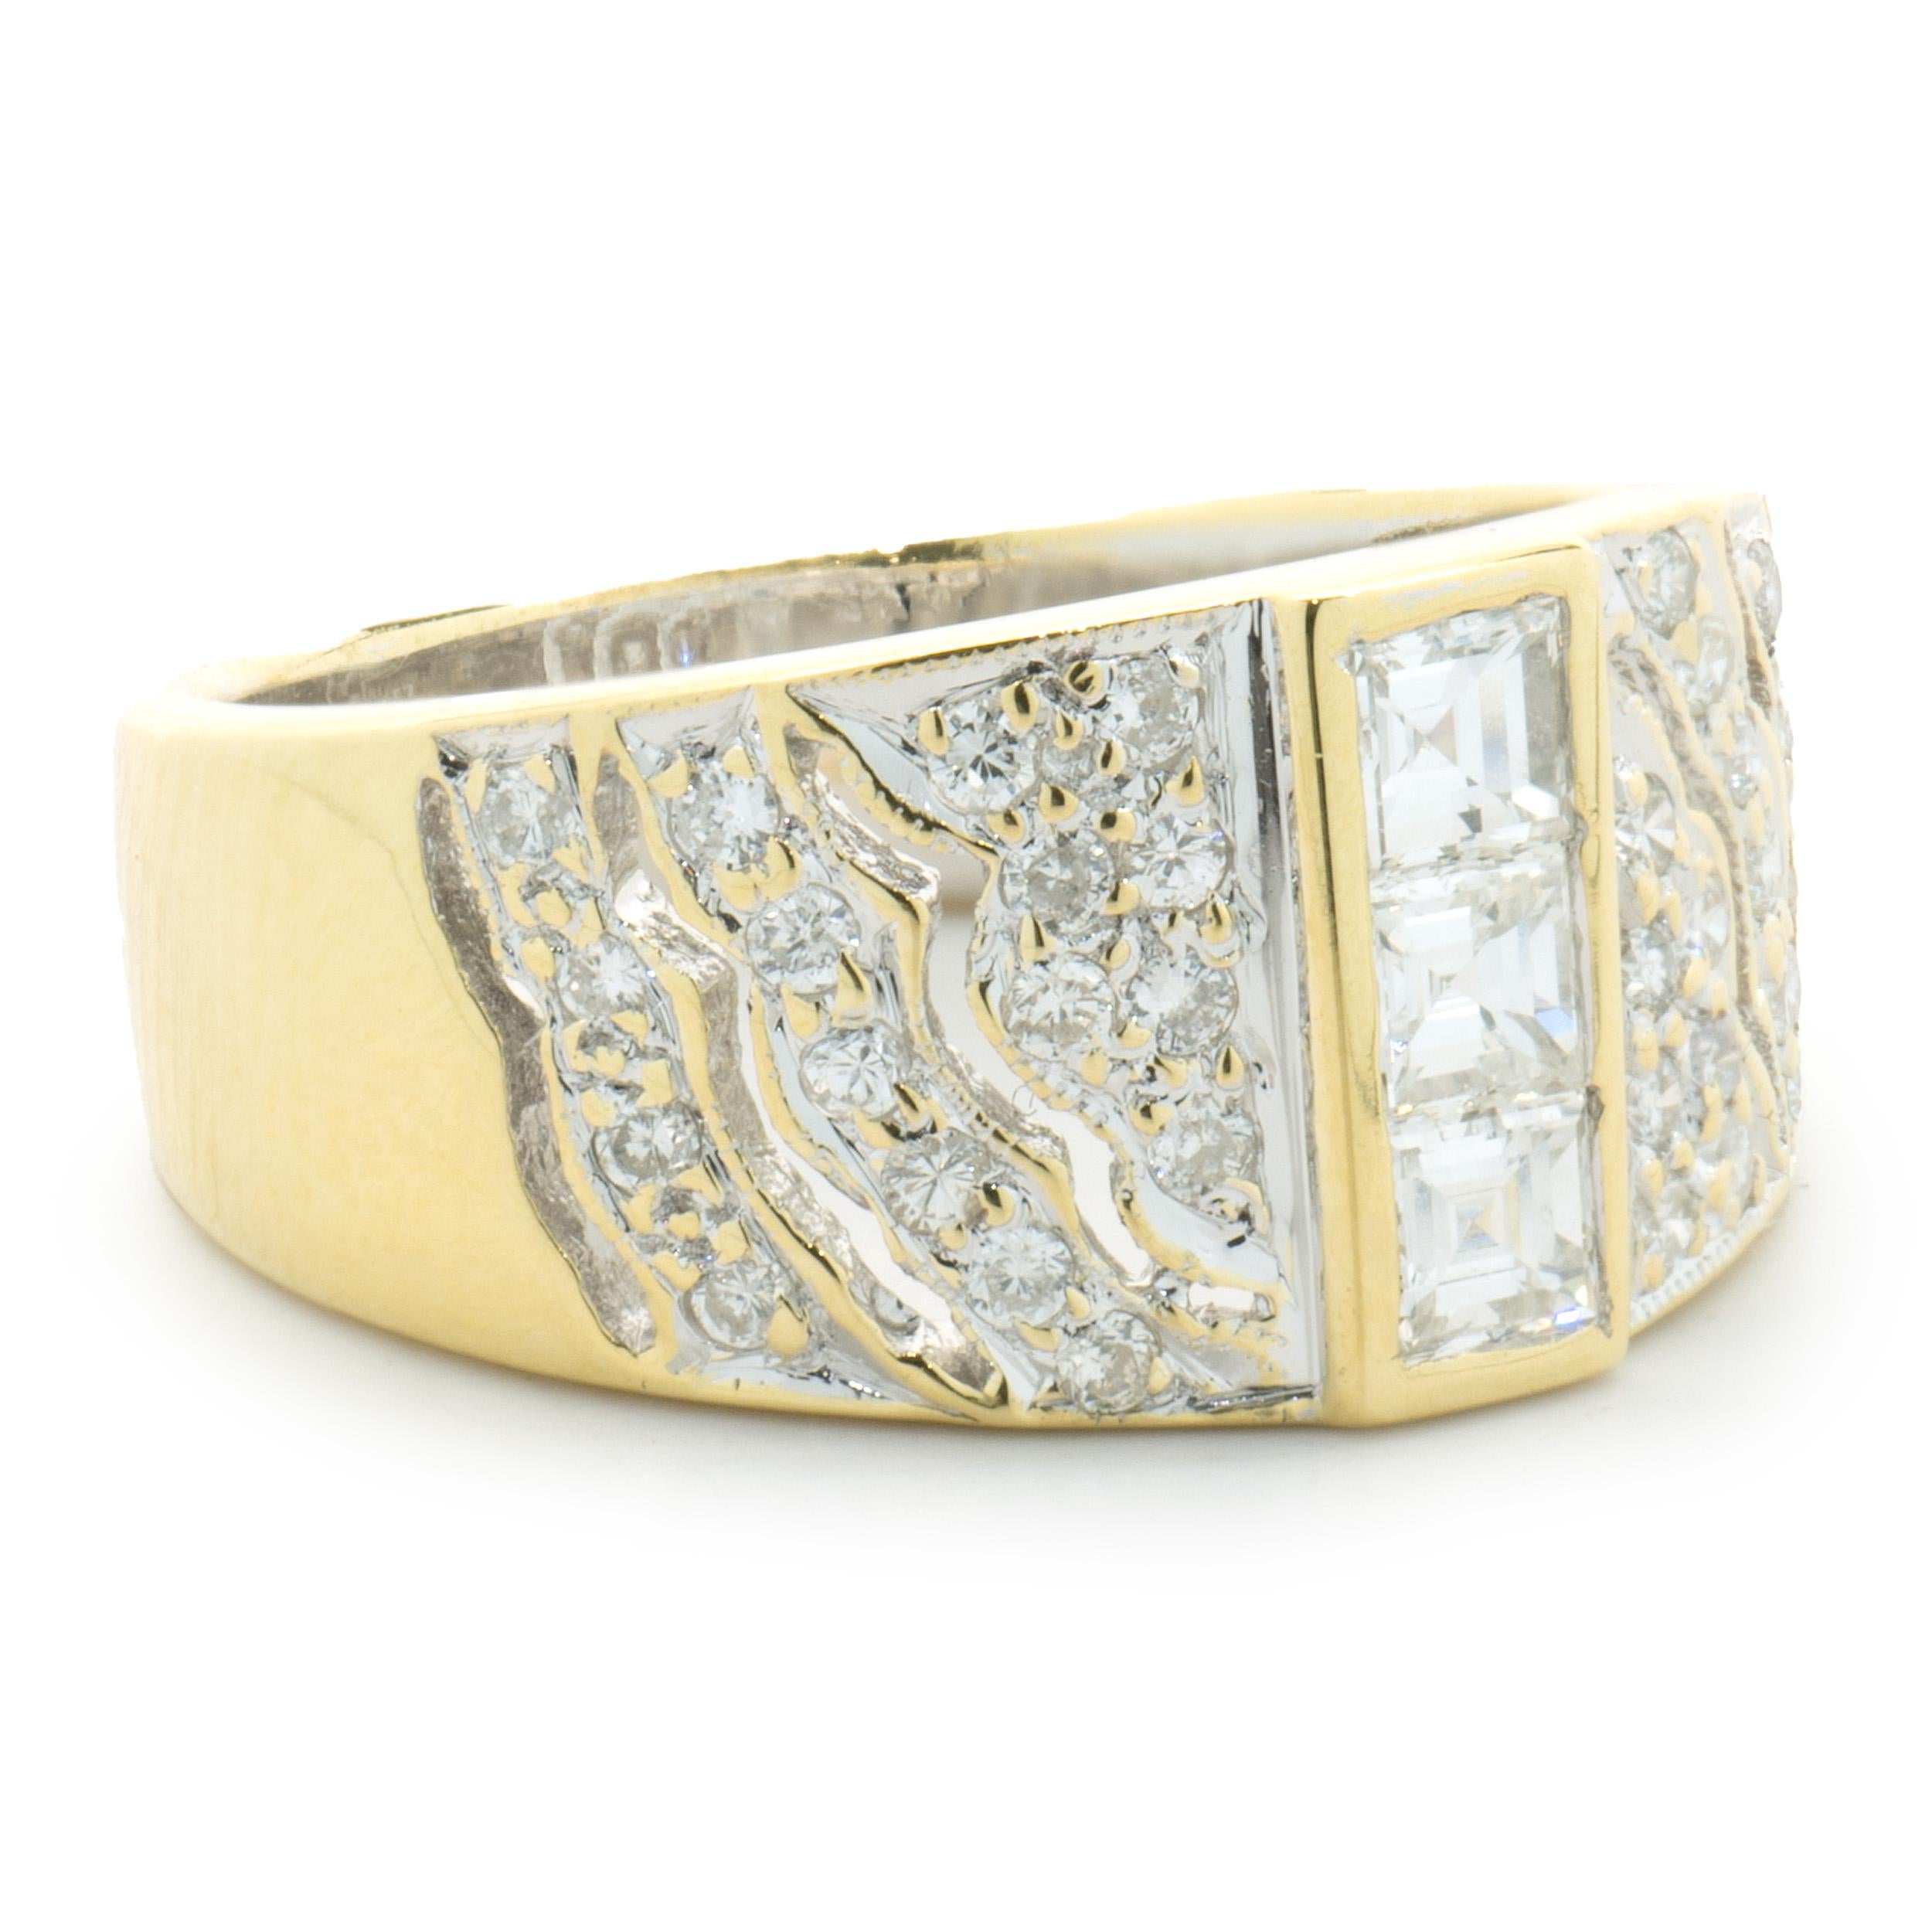 18 Karat Yellow Gold Diamond Cigar Band In Excellent Condition For Sale In Scottsdale, AZ